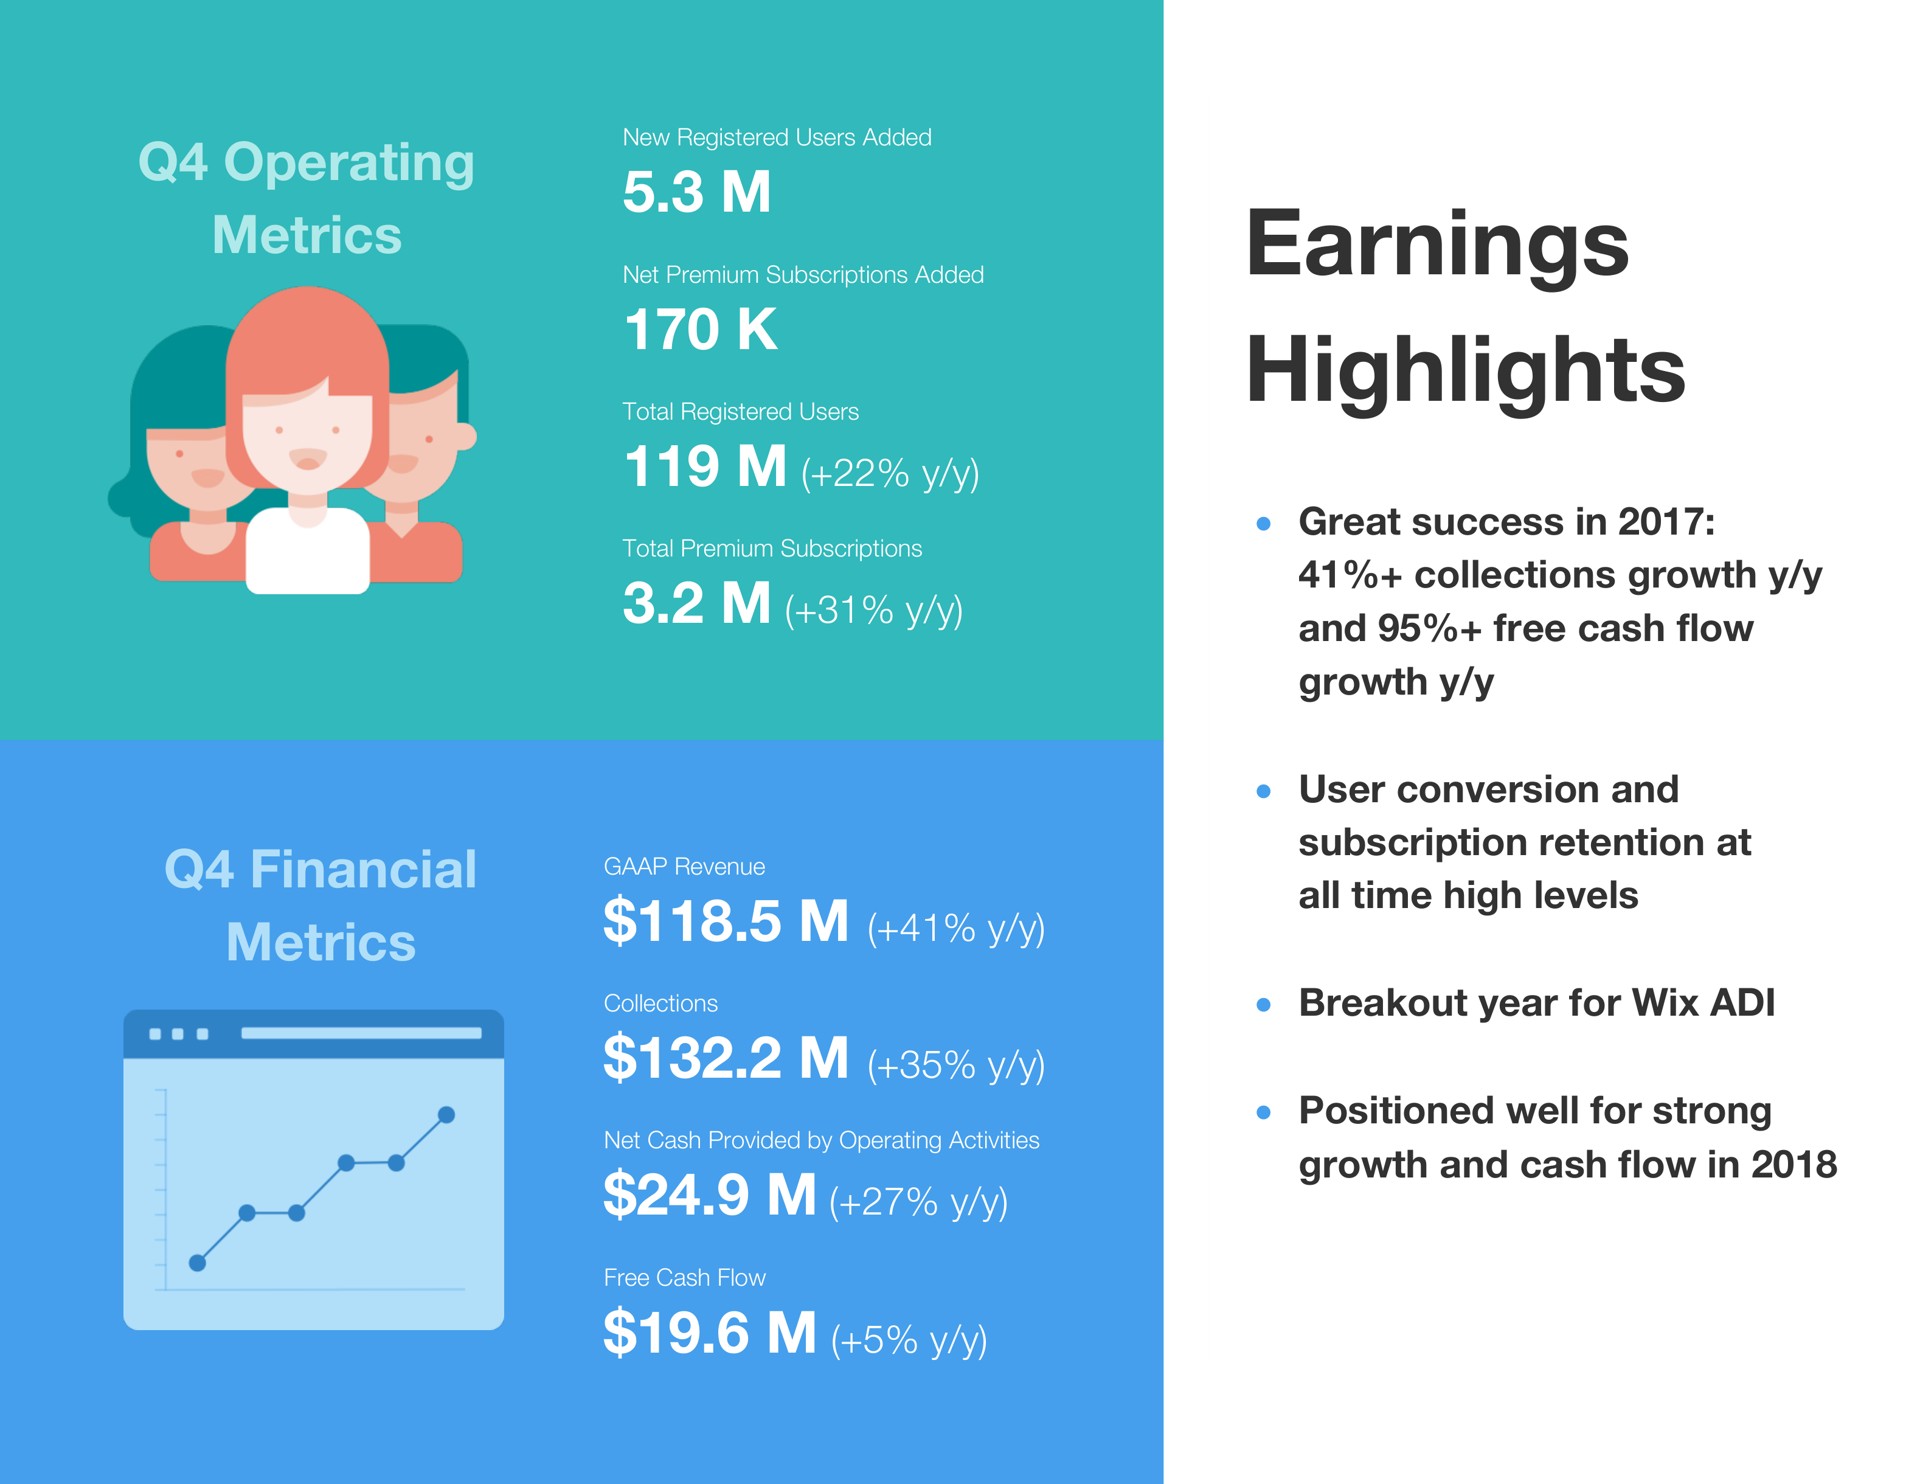 operating metrics financial metrics earnings highlights great success in collections growth and free cash flow growth user conversion and subscription retention at all time high levels breakout year for positioned well for strong growth and cash flow in cots elses uses a he | Wix